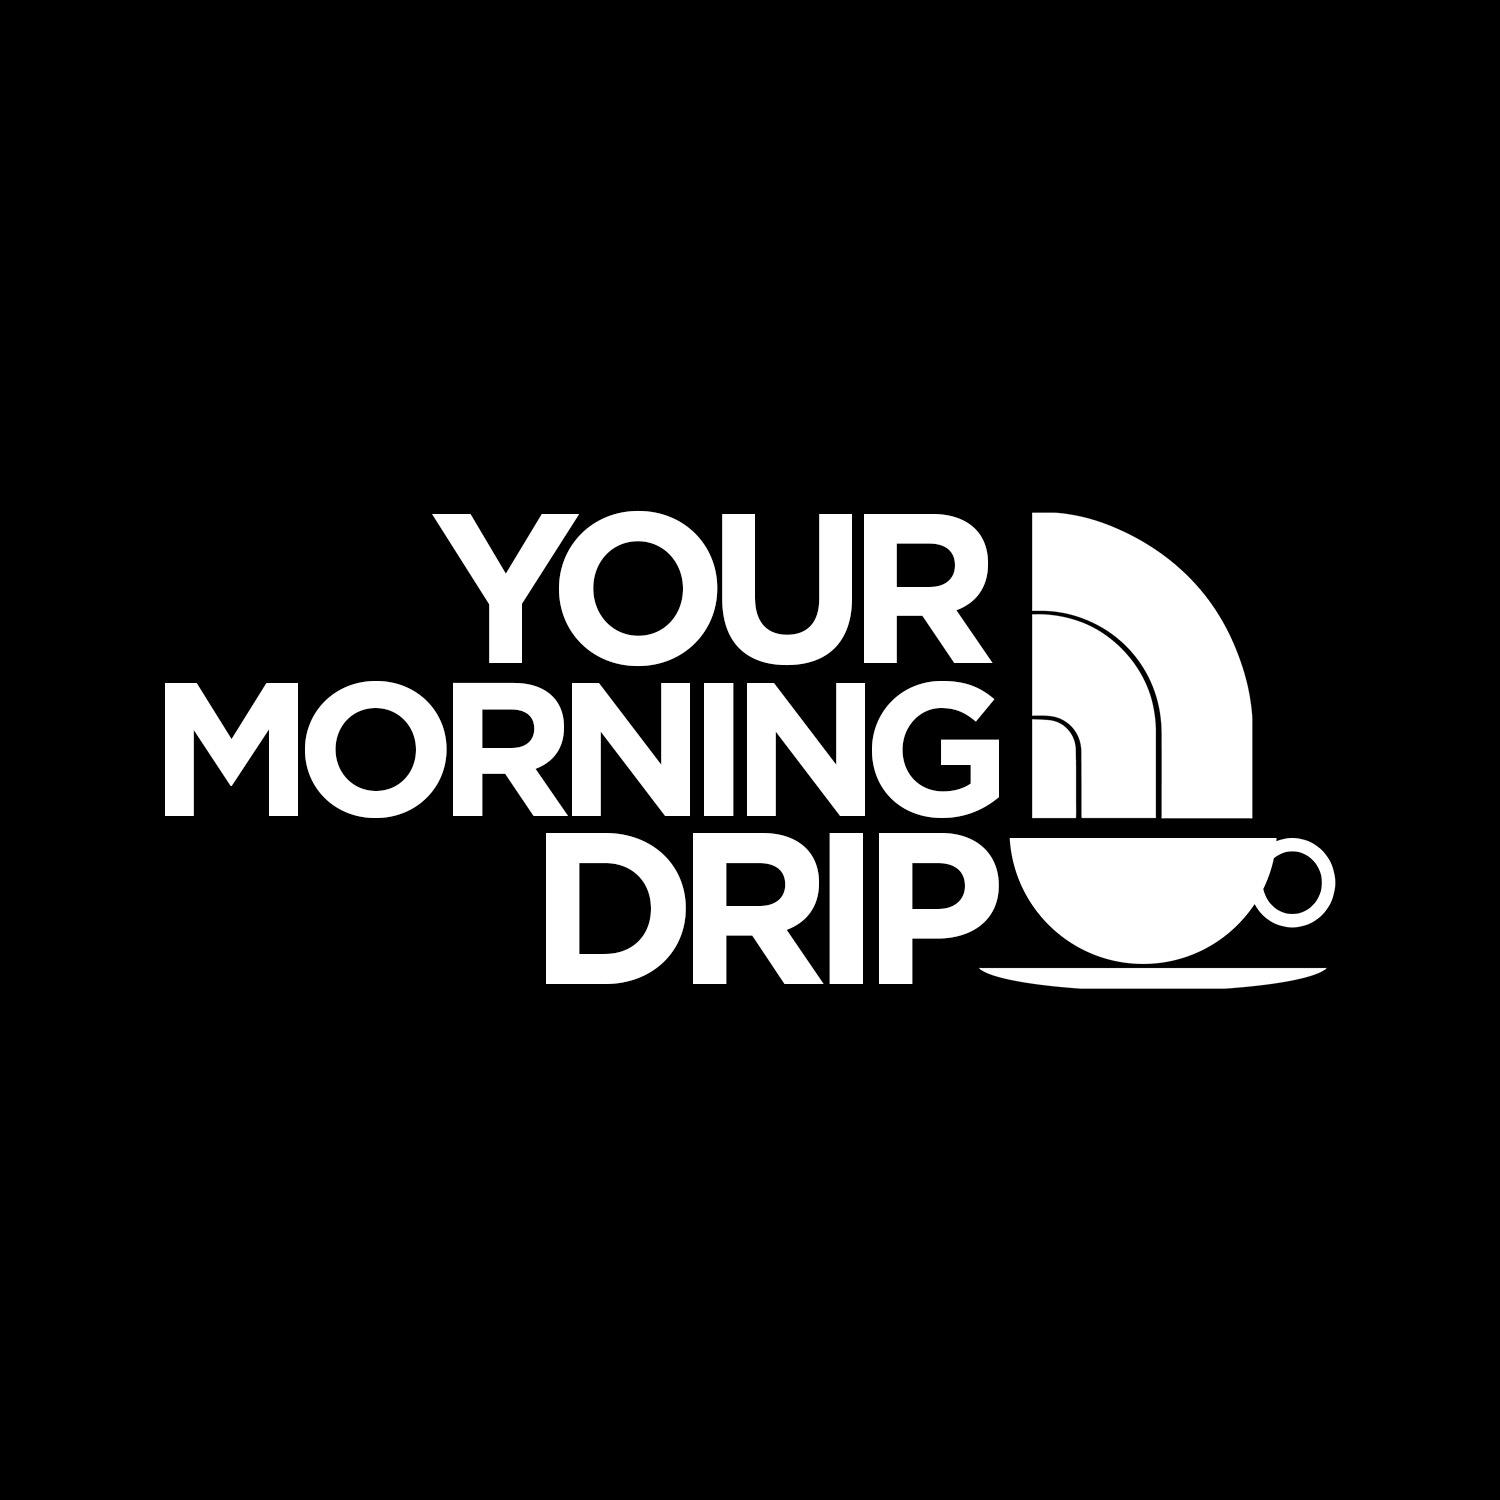 Your Morning Drip